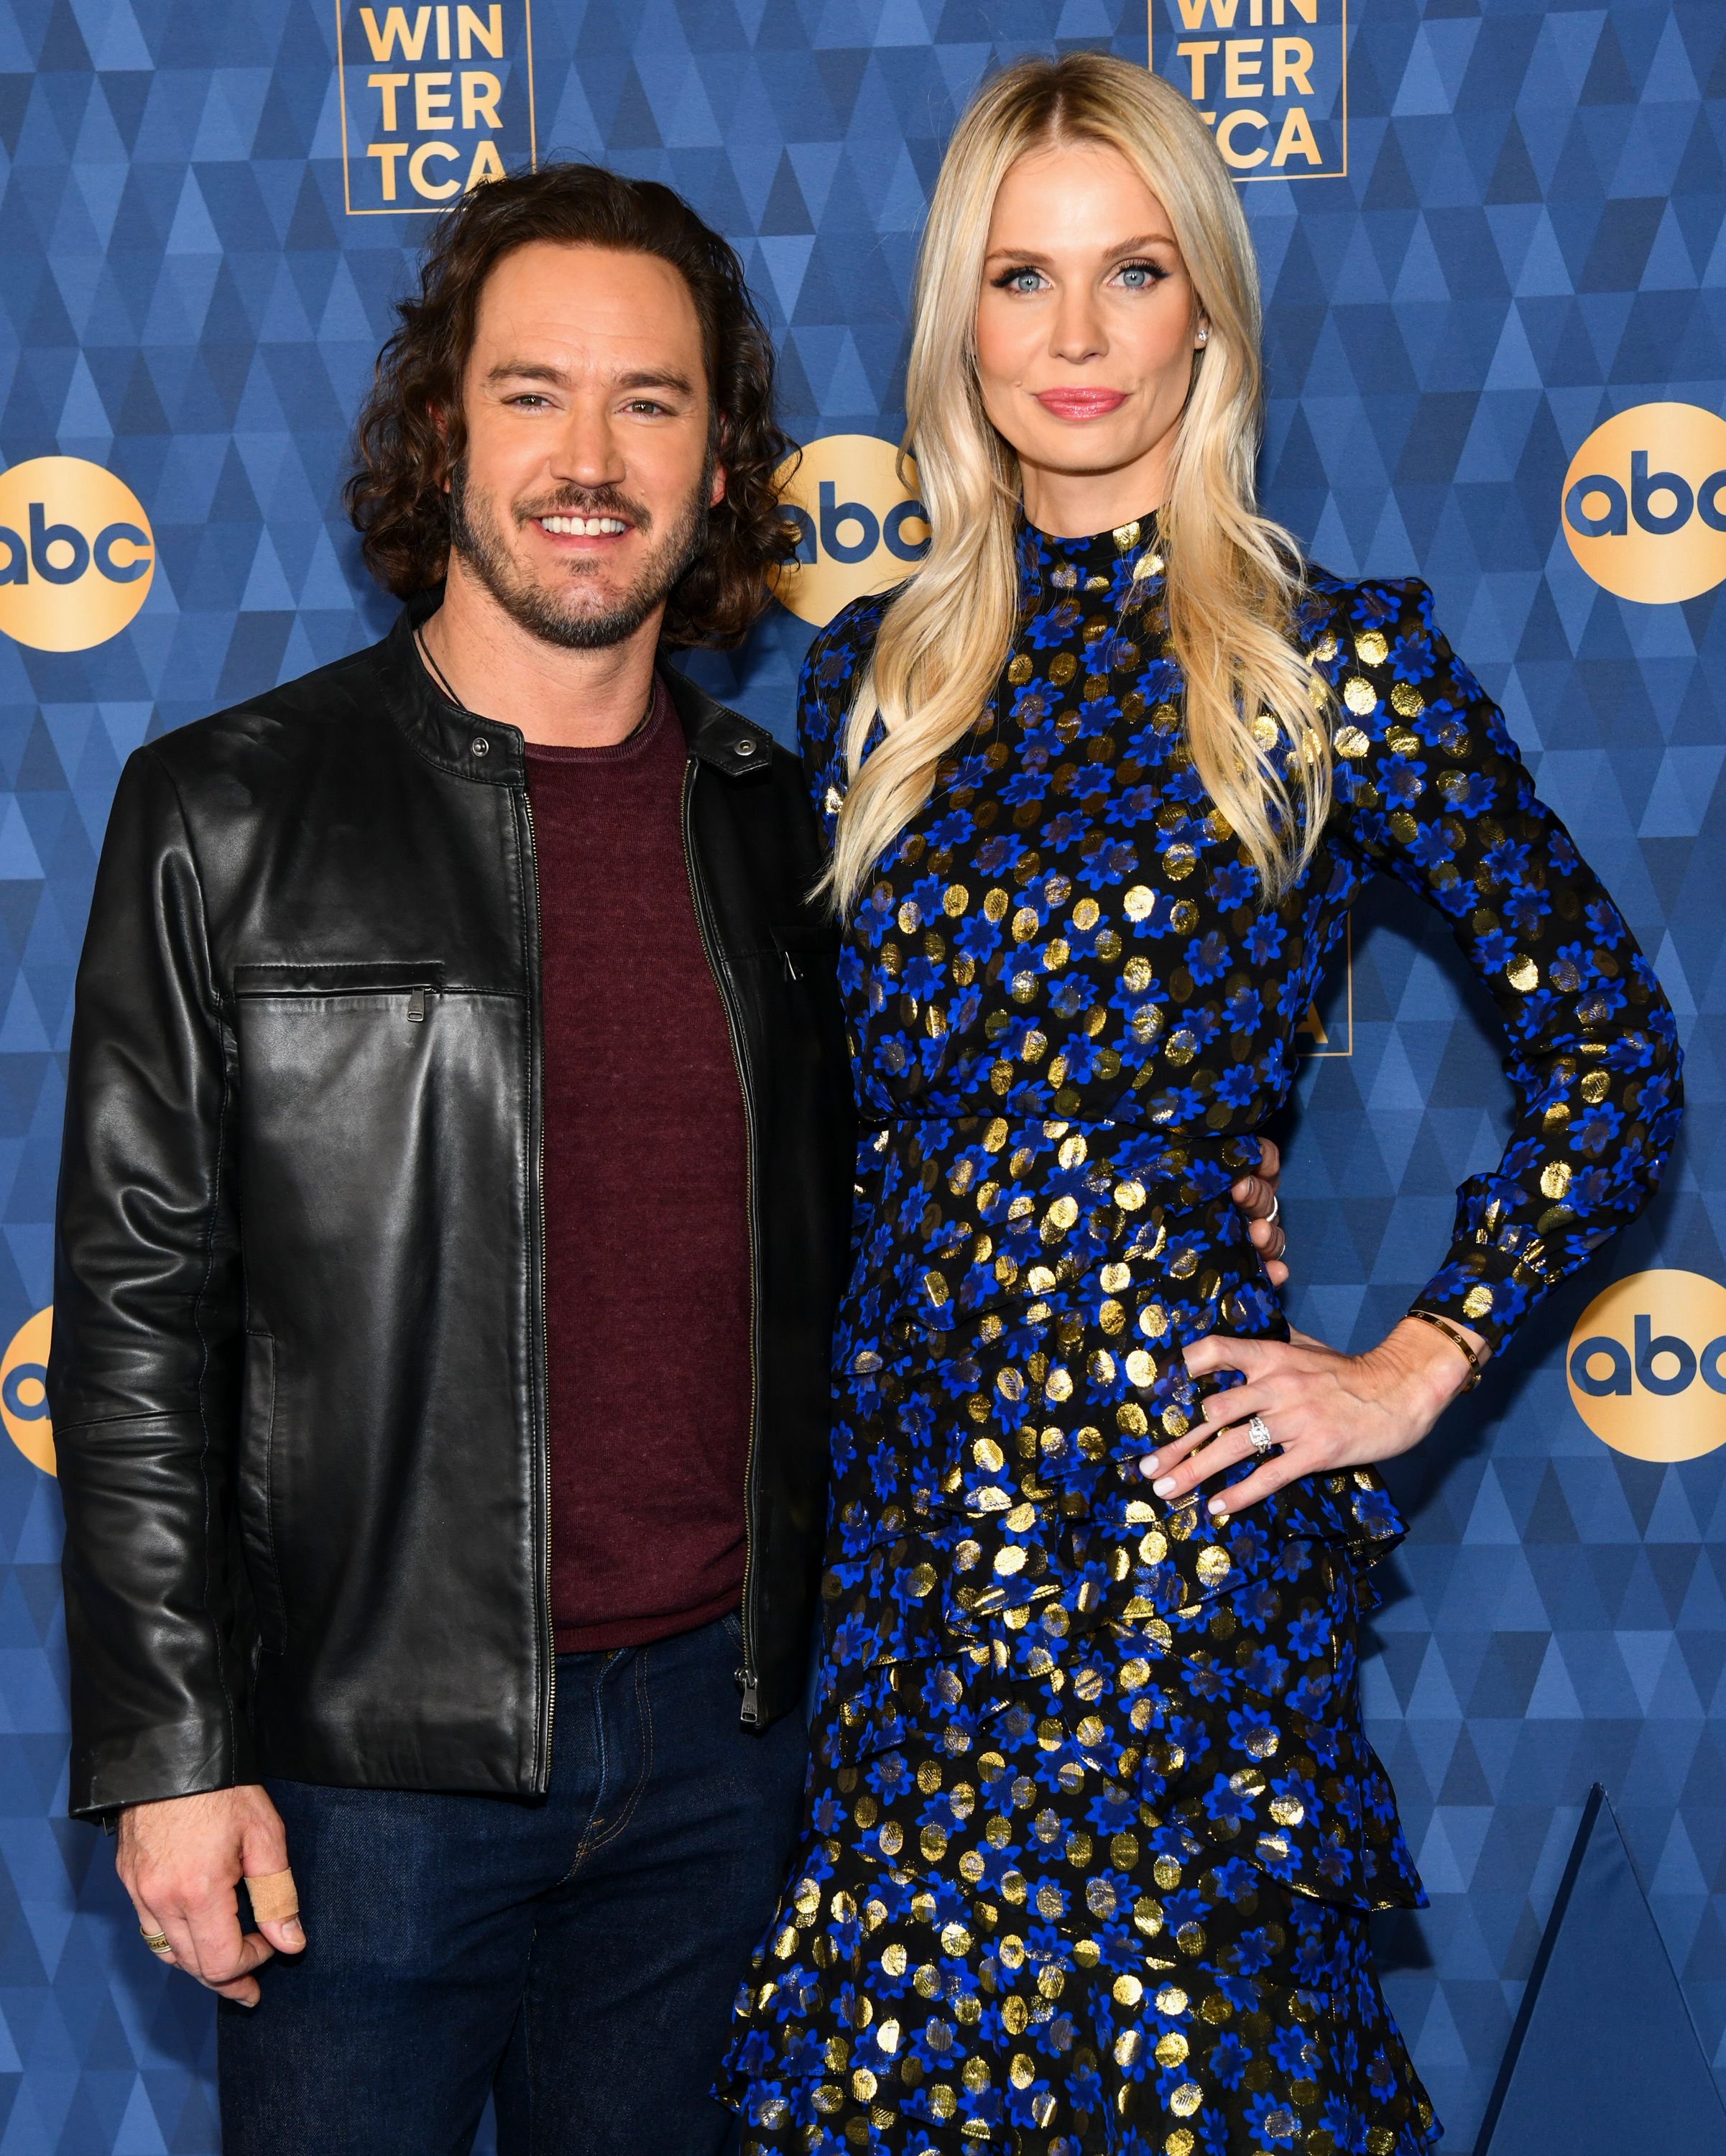 Mark-Paul Gosselaar and Catriona McGinn during the ABC Television's Winter Press Tour 2020 at The Langham Huntington, Pasadena on January 08, 2020 in Pasadena, California. | Source: Getty Images